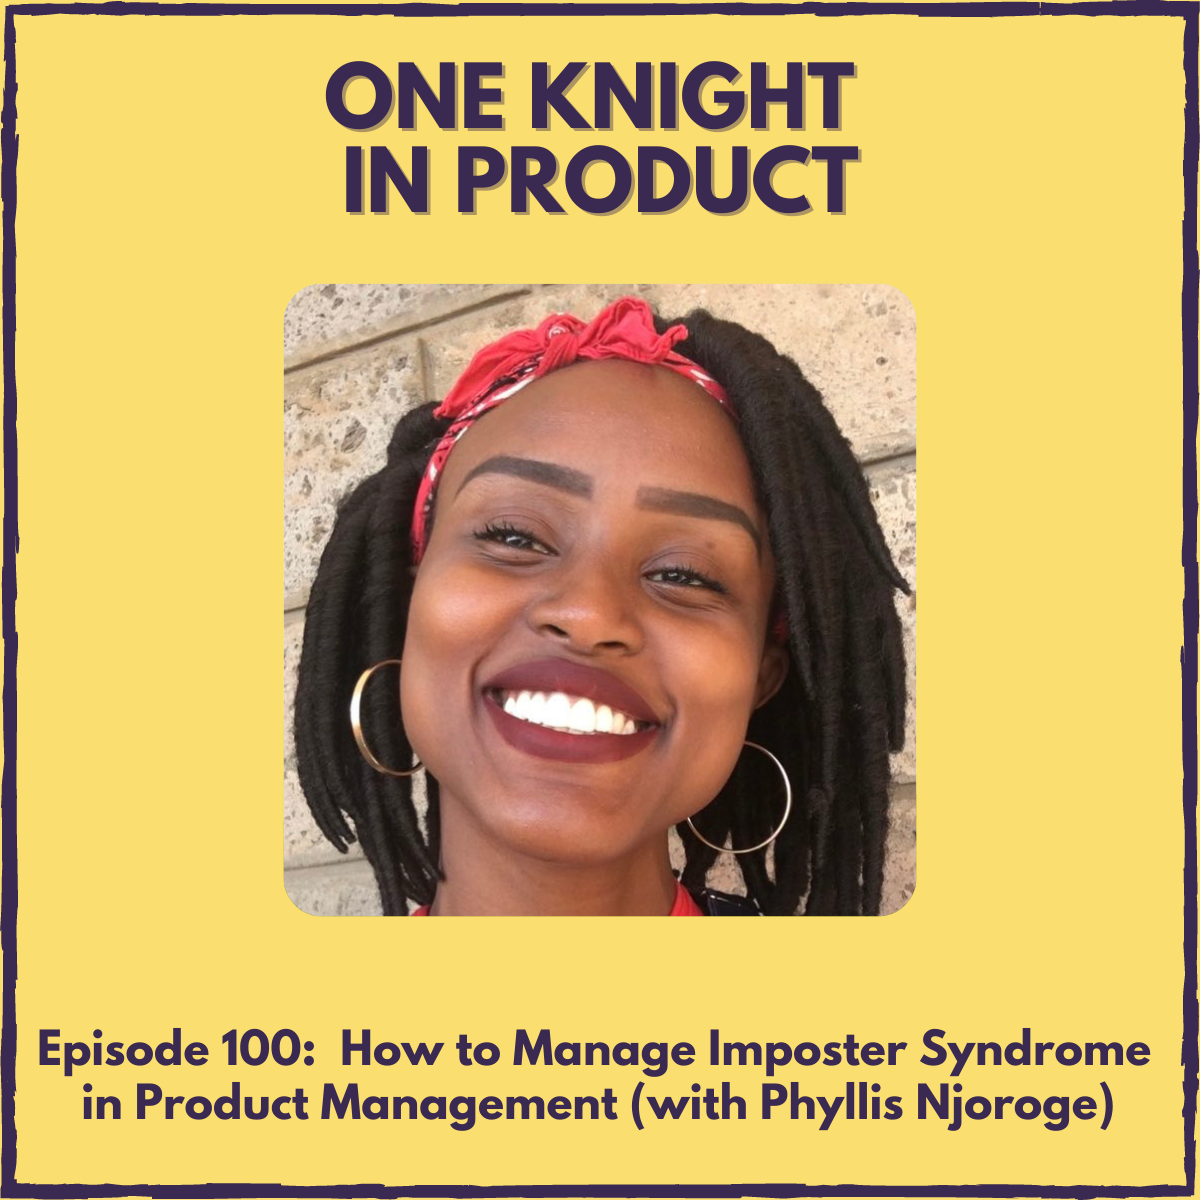 How to Manage Imposter Syndrome in Product Management (with Phyllis Njoroge, author ”From Fraud to Freedom”)